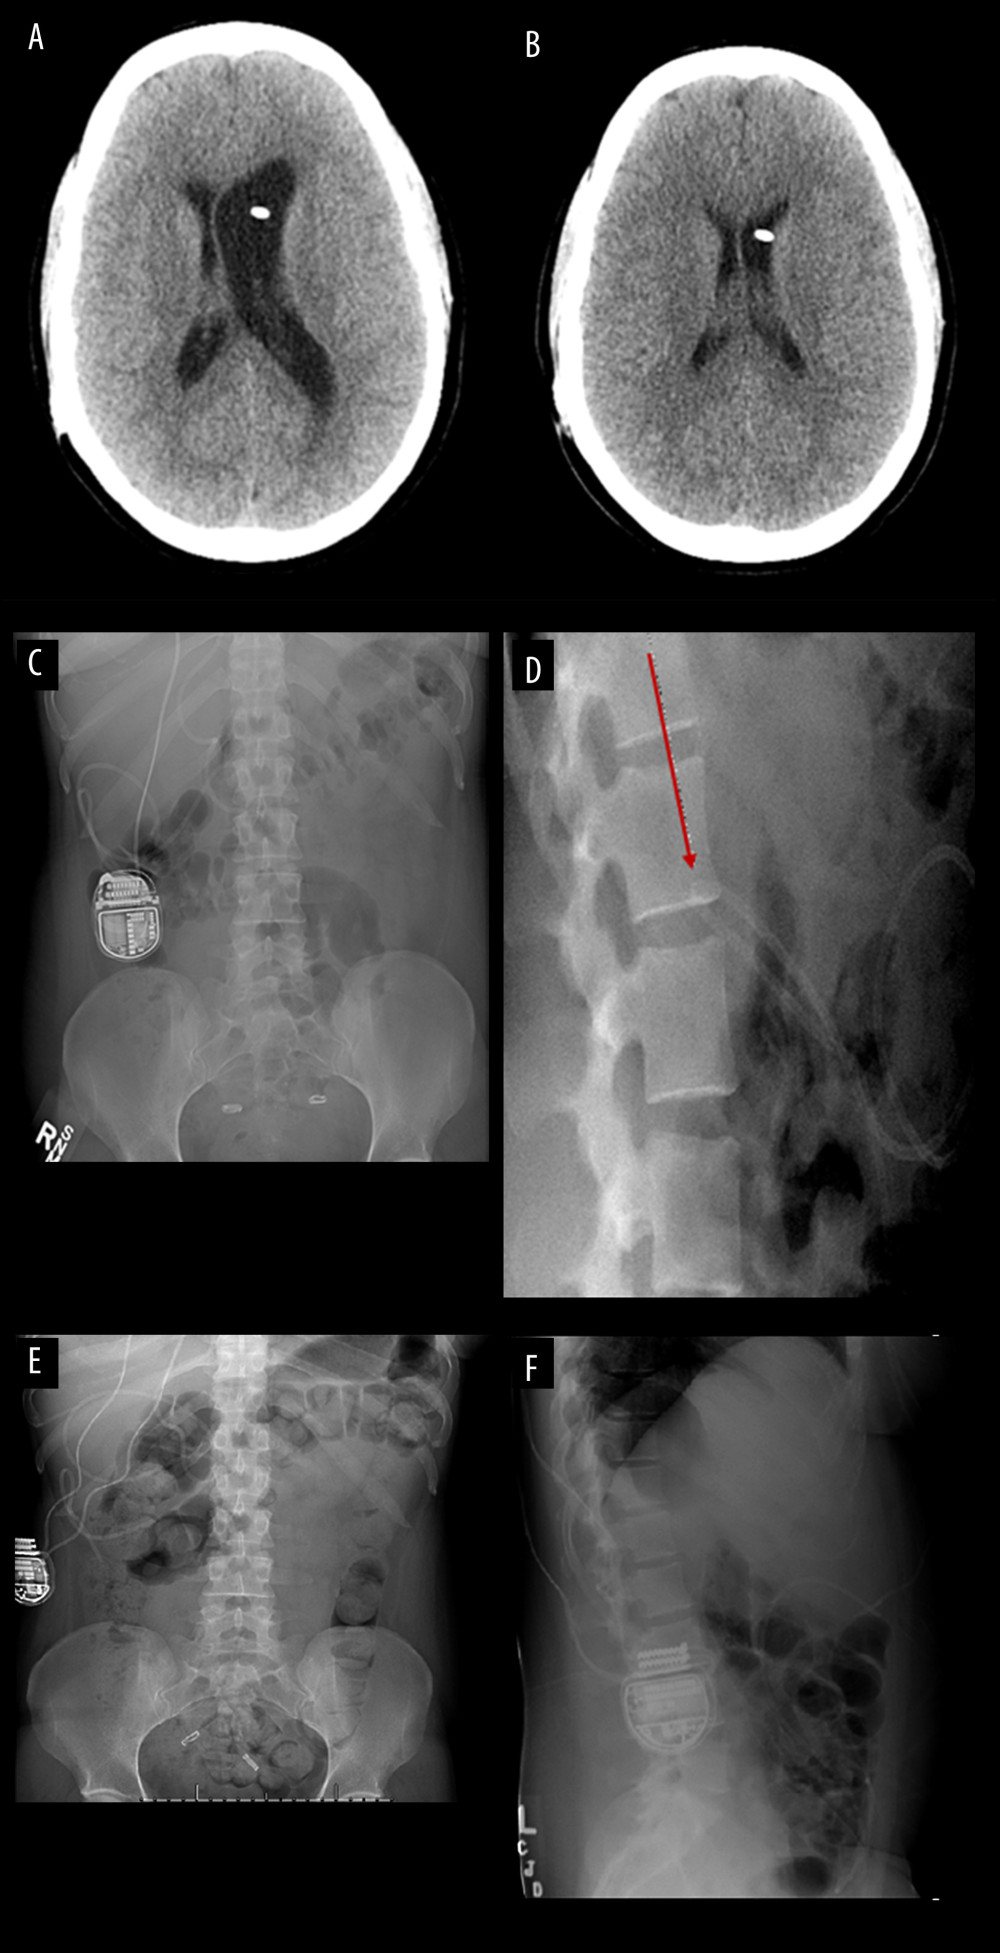 Axial computed tomography (CT) scan depicting enlarged ventricles. (A) compared to prior CT scan (B) concerning for shunt failure. Anteroposterior (C) and lateral (D) shunt series X-rays demonstrating kinking of the distal peritoneal catheter (arrow) compared to postoperative anteroposterior (E) and lateral (F) shunt series X-rays following laparoscopic tubal ligation, without evidence of kinking at that time.